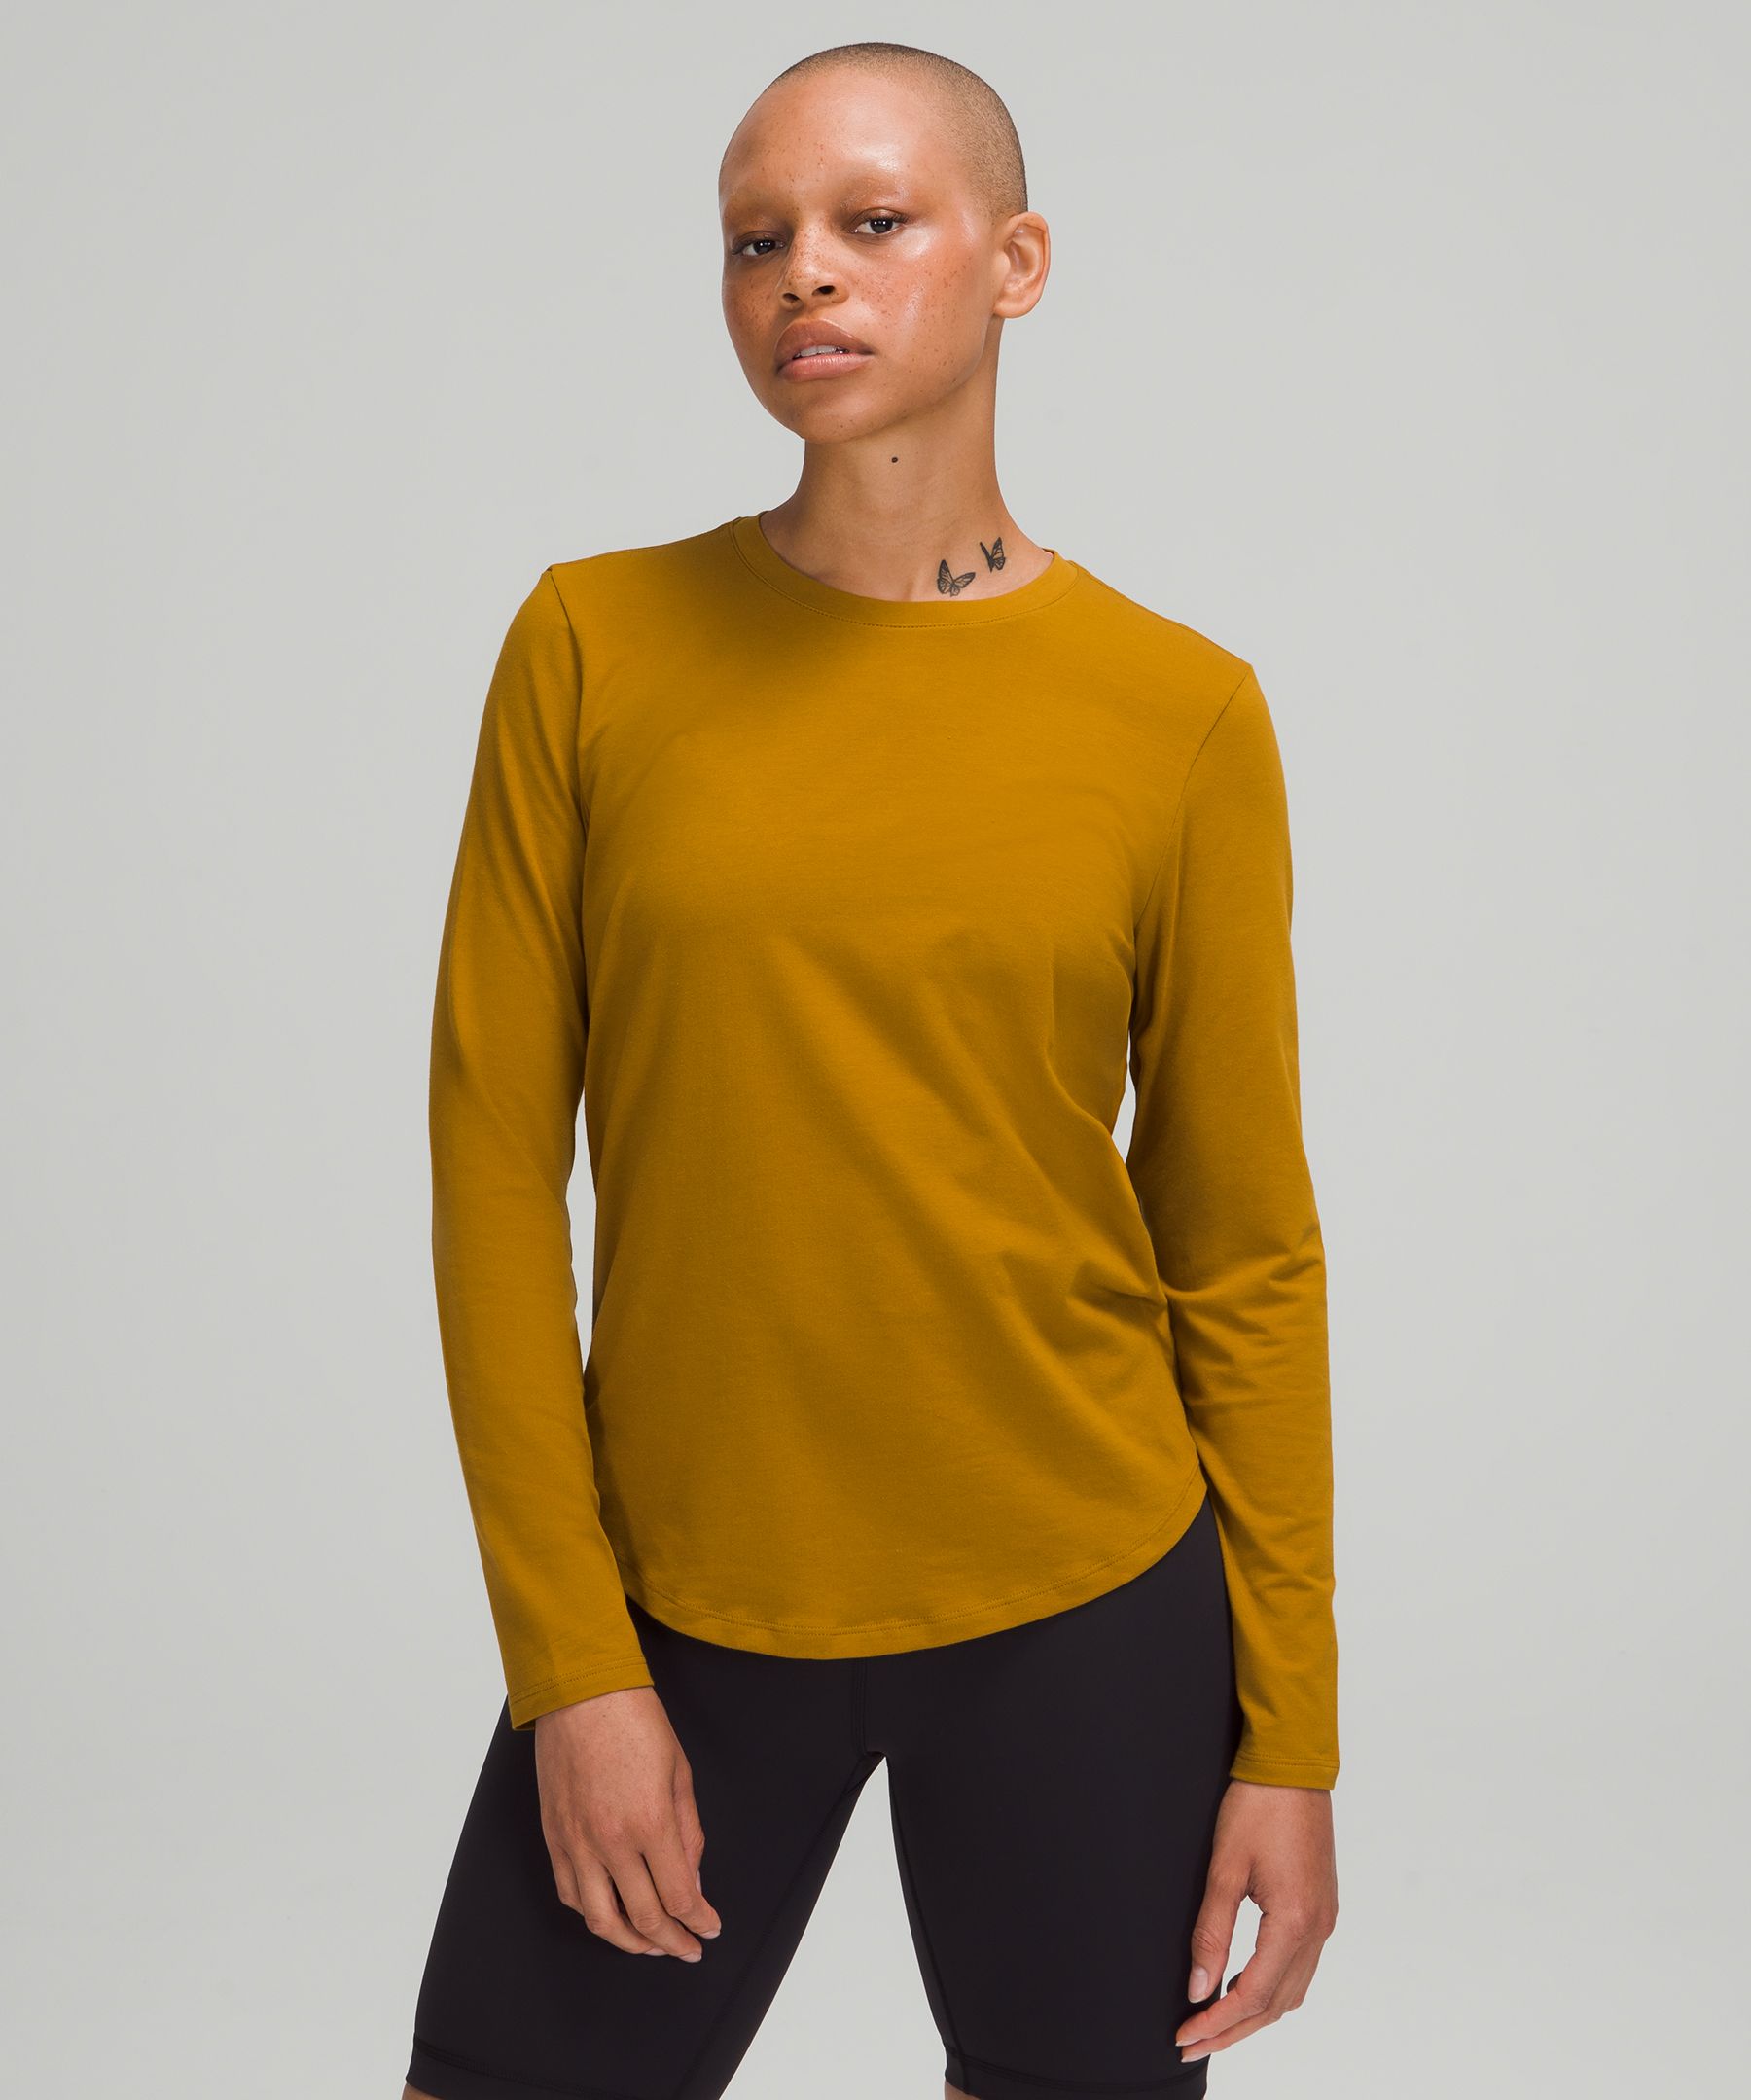 Lululemon shoppers love this $54 long sleeve top